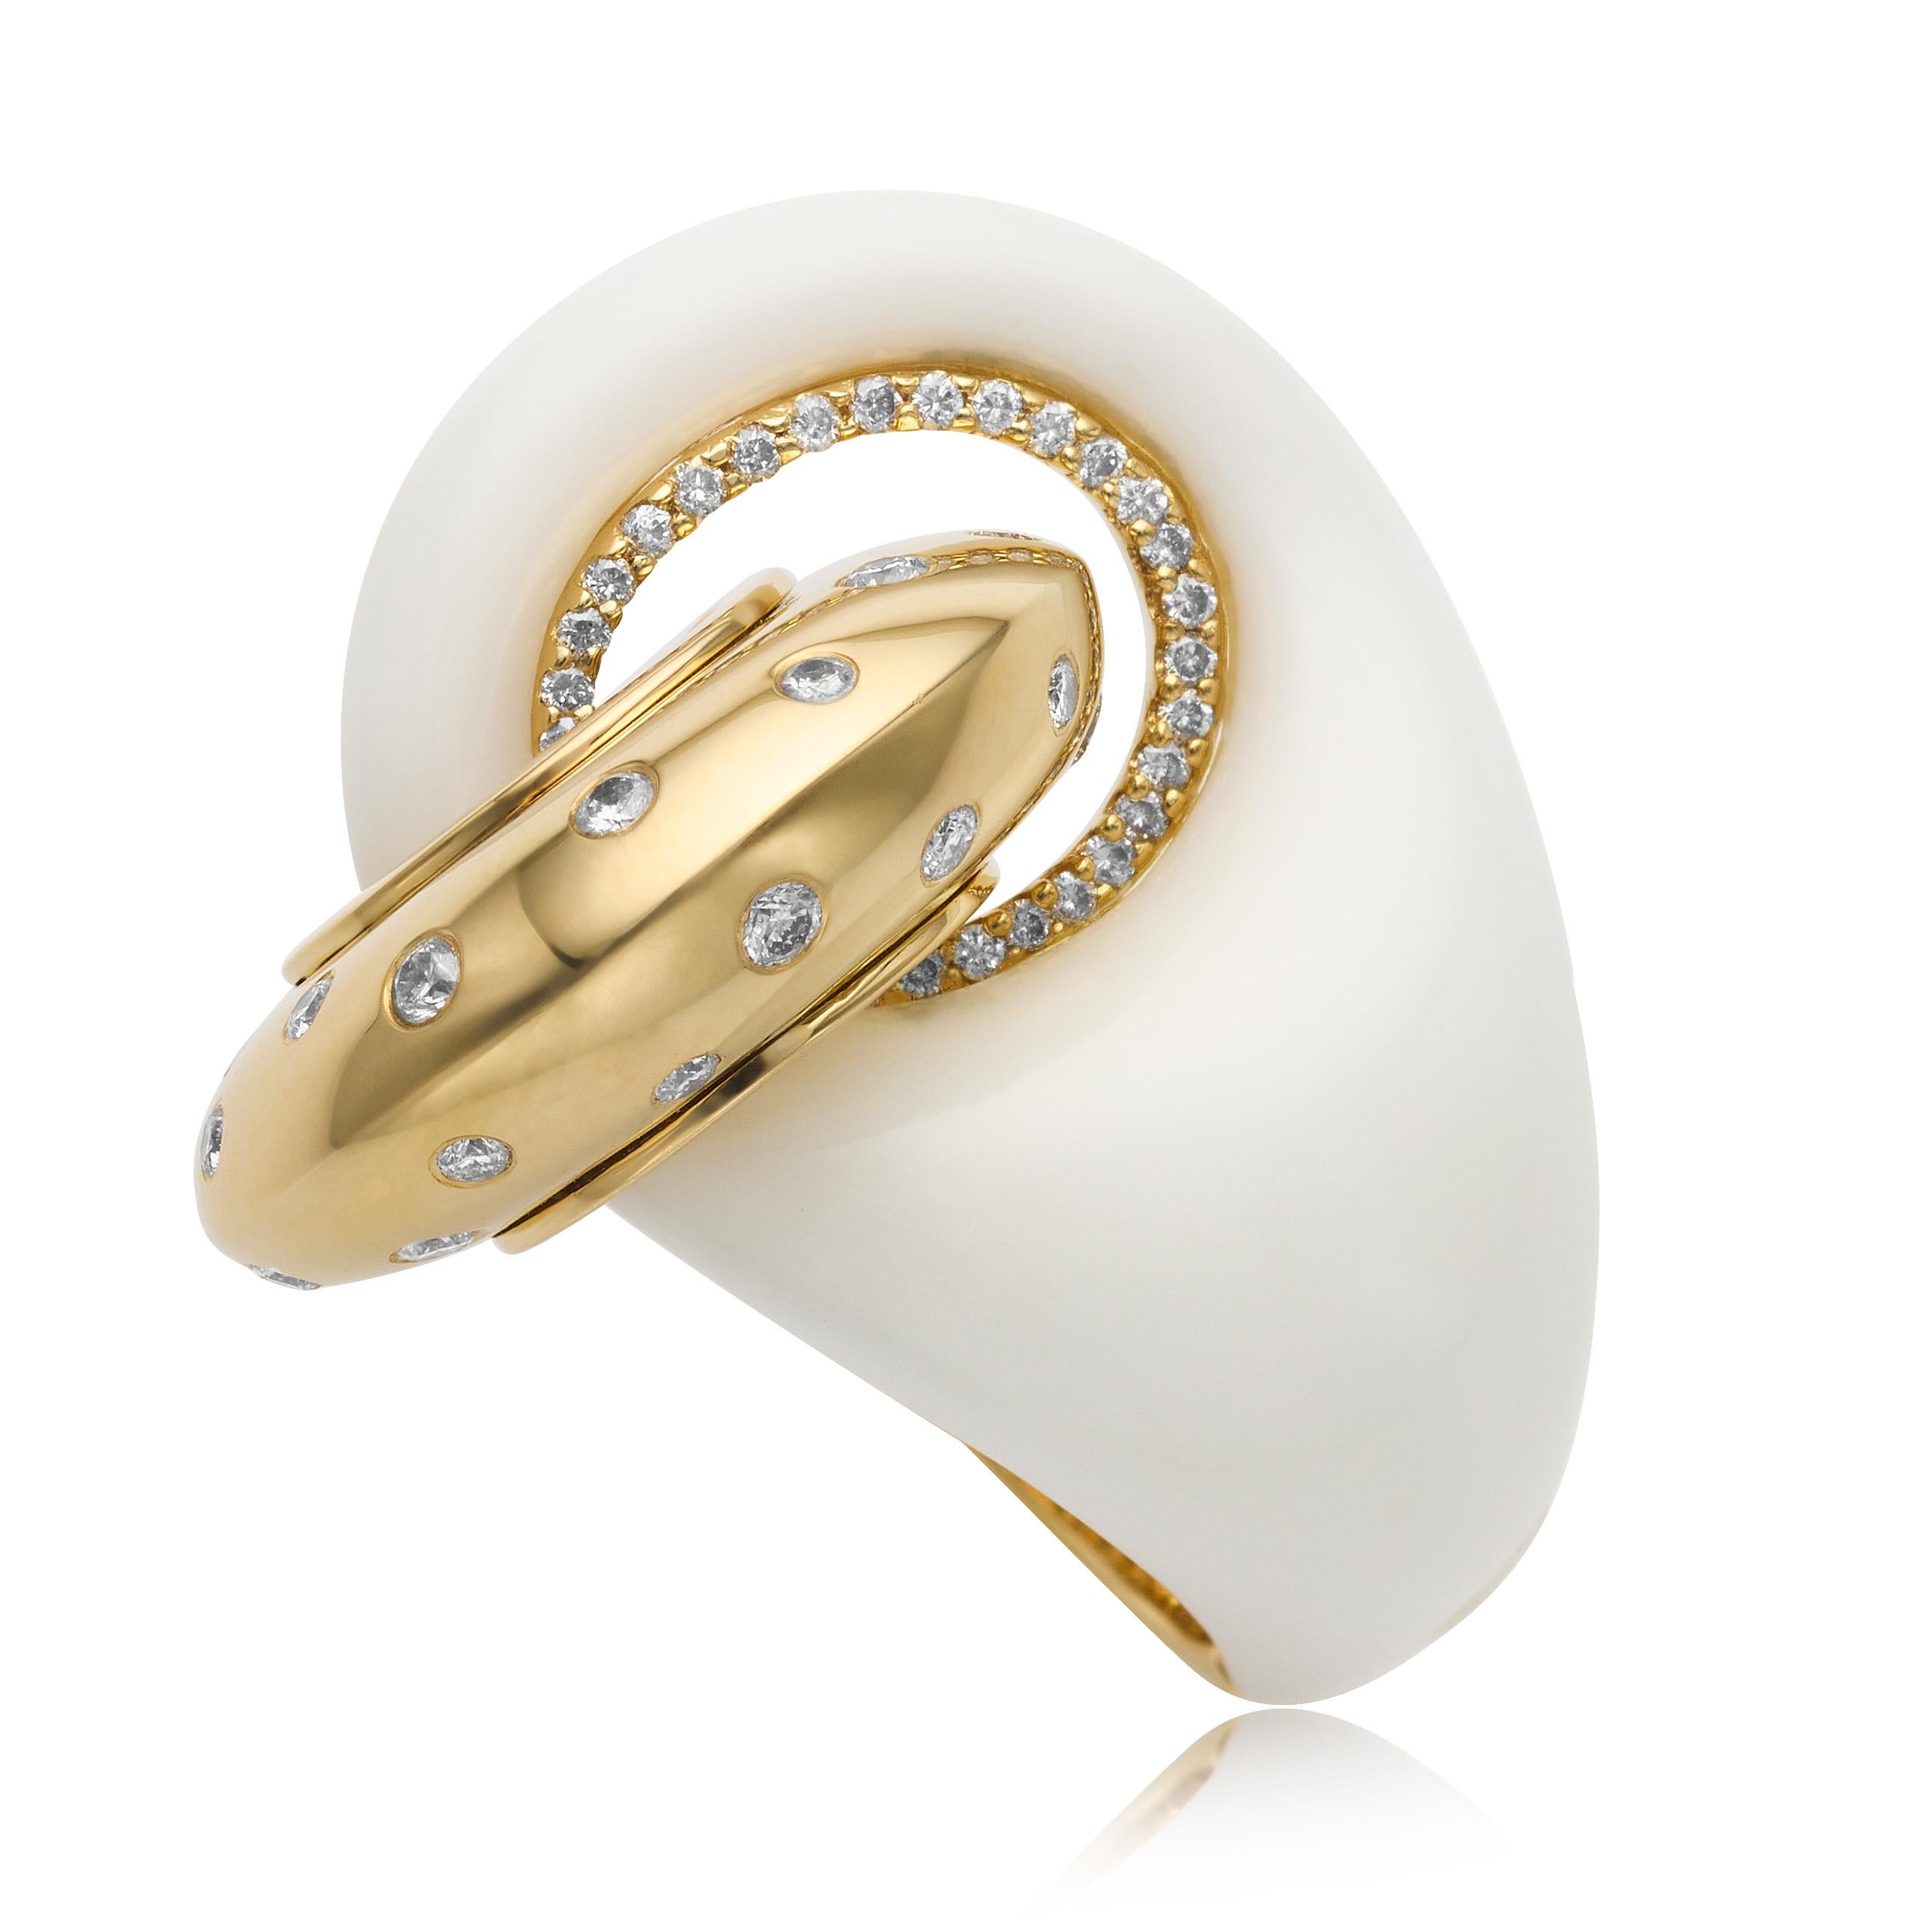 From the Eiseman Estate Jewelry Collection, circa 2015, 18 karat yellow gold and white agate interlocking ring. This ring is crafted with 51 flush set round brilliant cut diamonds with a total combined weight of 0.71 carats. These diamonds have G-H